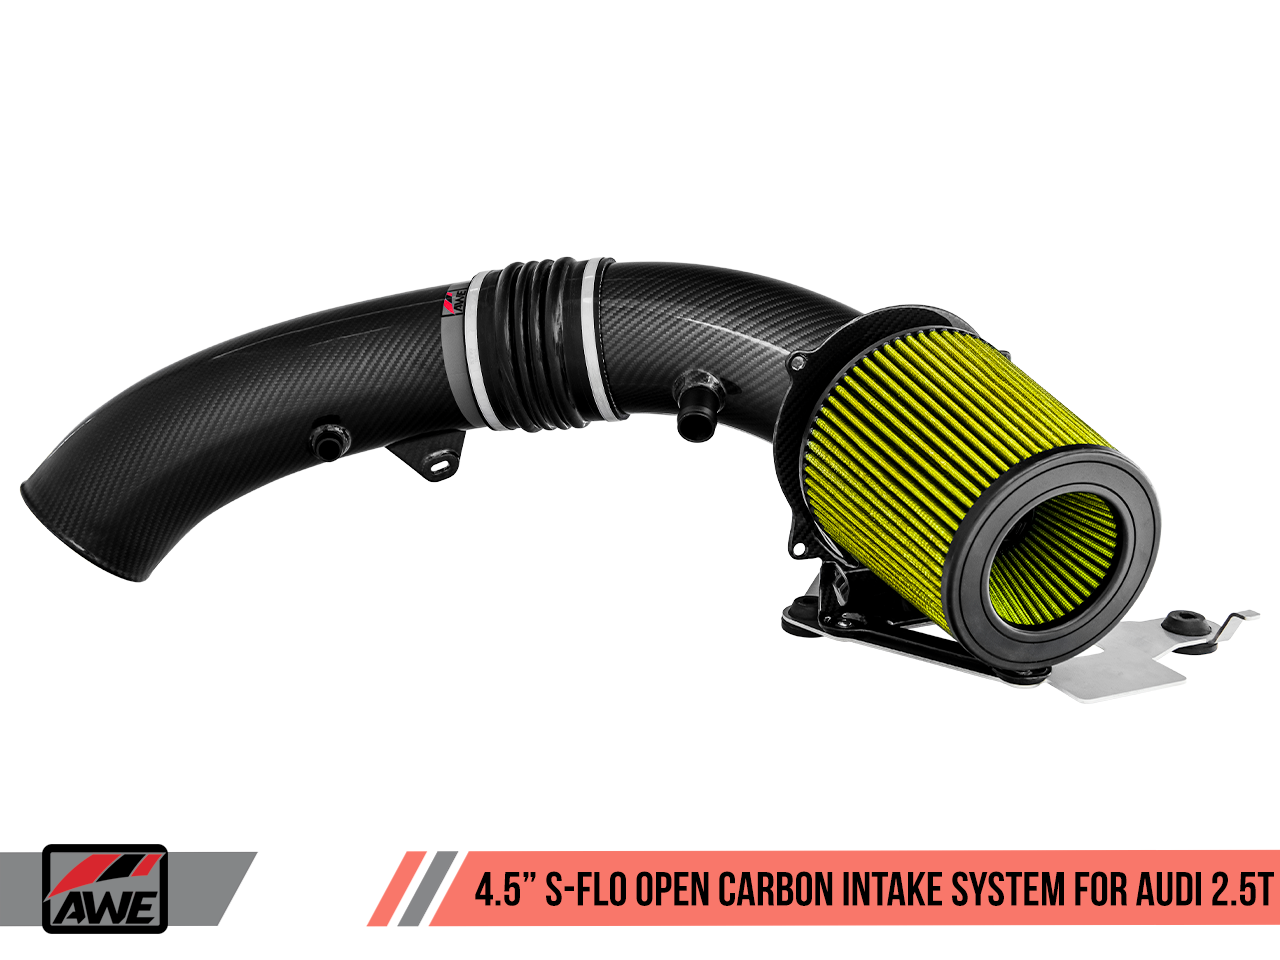 AWE 4.5" S-FLO Carbon Intake System for Audi RS 3 / TT RS 2.5T